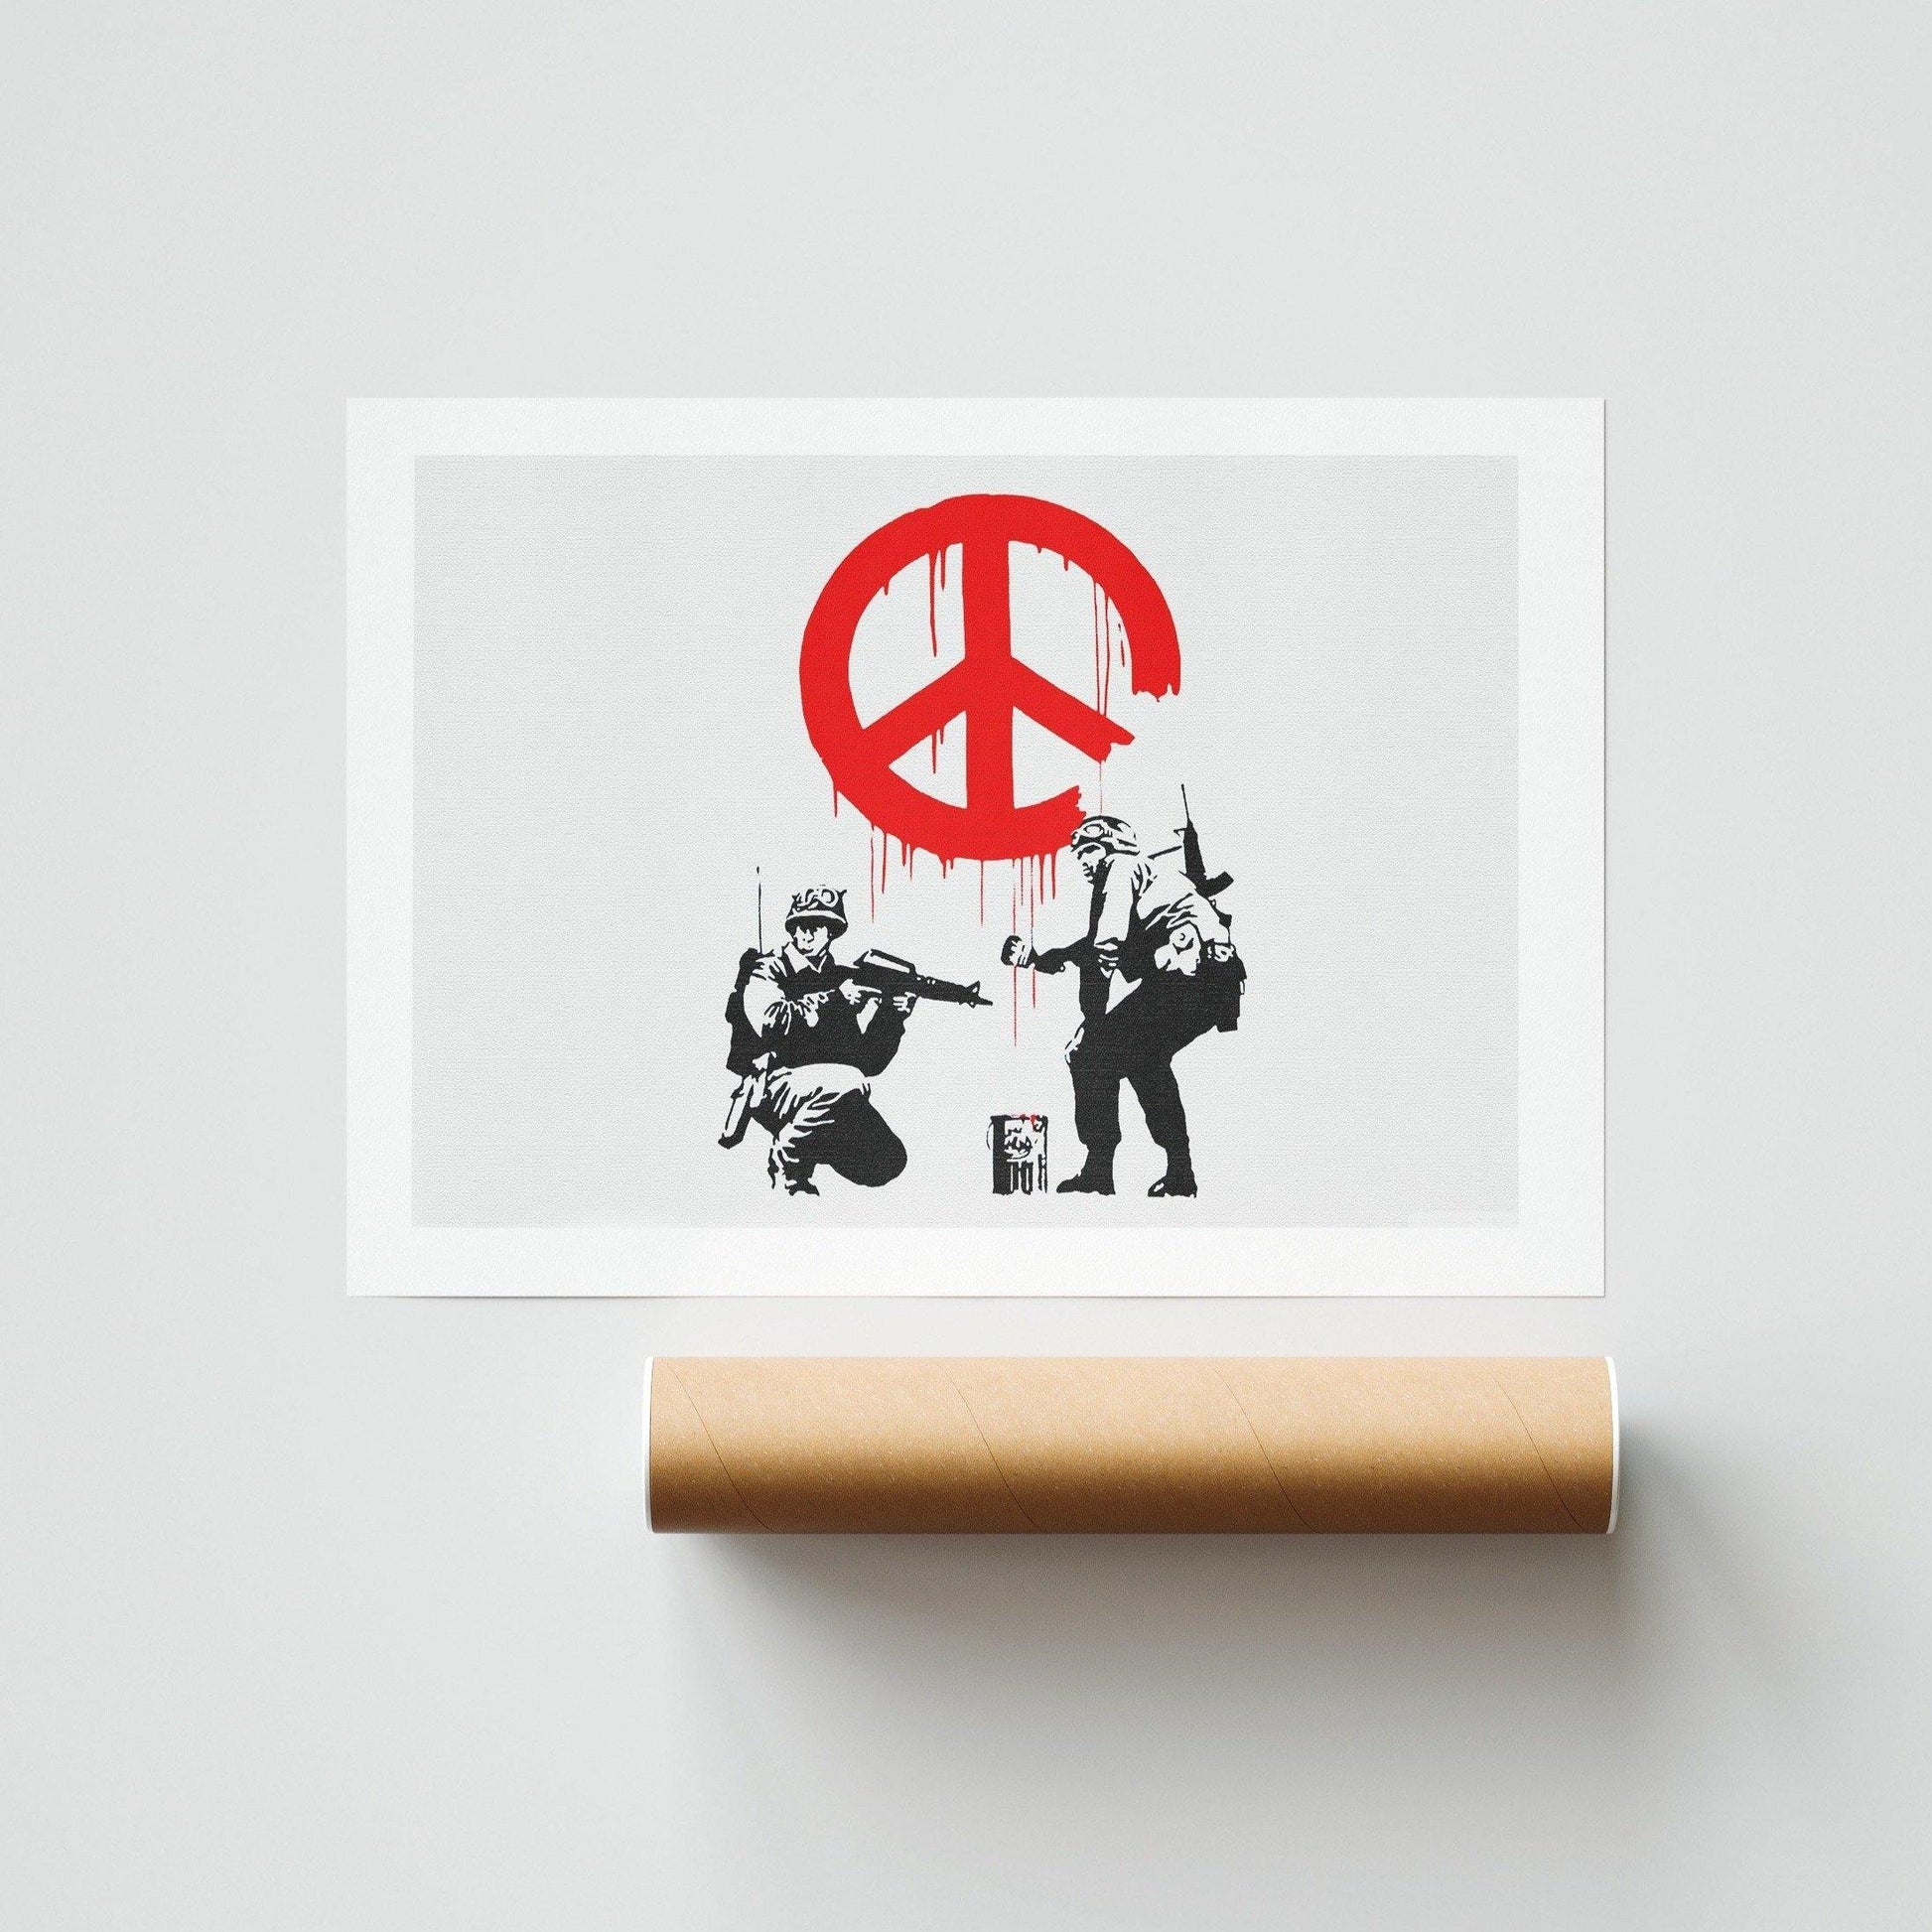 This poster is brought to you by 98Types, the authority on street art. From the streets of London to the walls of your home, this poster is a must-have for Banksy fans. Depicting two soldiers in a passionate embrace, it sends a powerful message of peace. Perfect for your bedroom, living room or office, this poster is sure to add some personality and culture to your space.